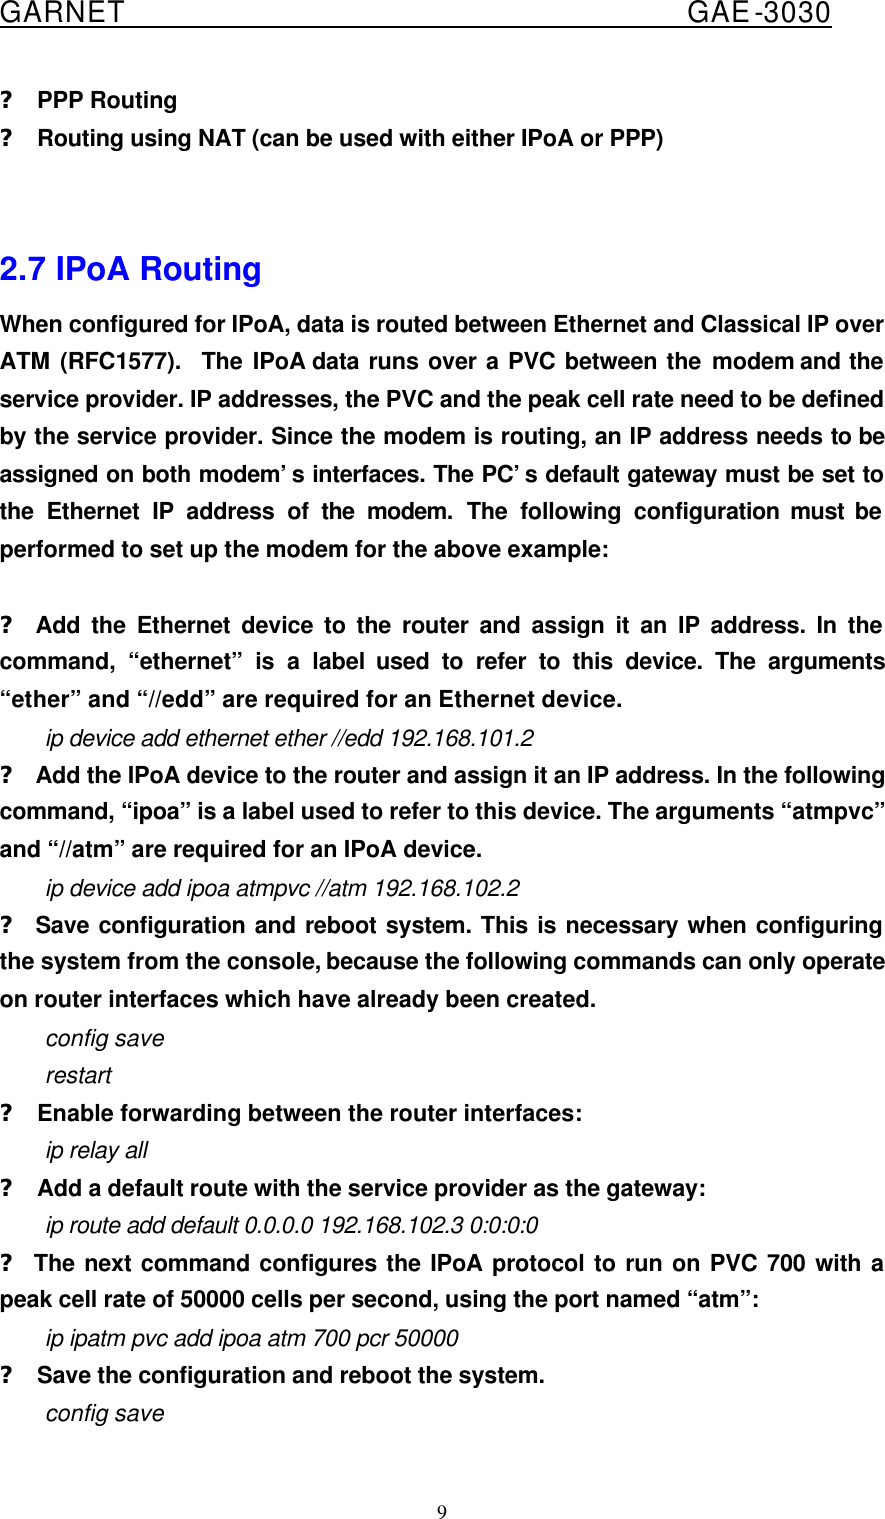  GARNET                                        GAE-3030 9 ? PPP Routing ? Routing using NAT (can be used with either IPoA or PPP)   2.7 IPoA Routing When configured for IPoA, data is routed between Ethernet and Classical IP over ATM (RFC1577).  The IPoA data runs over a PVC between the modem and the service provider. IP addresses, the PVC and the peak cell rate need to be defined by the service provider. Since the modem is routing, an IP address needs to be assigned on both modem’s interfaces. The PC’s default gateway must be set to the Ethernet IP address of the modem. The following configuration must be performed to set up the modem for the above example:  ? Add the Ethernet device to the router and assign it an IP address. In the command, “ethernet” is a label used to refer to this device. The arguments “ether” and “//edd” are required for an Ethernet device. ip device add ethernet ether //edd 192.168.101.2 ? Add the IPoA device to the router and assign it an IP address. In the following command, “ipoa” is a label used to refer to this device. The arguments “atmpvc” and “//atm” are required for an IPoA device. ip device add ipoa atmpvc //atm 192.168.102.2 ? Save configuration and reboot system. This is necessary when configuring the system from the console, because the following commands can only operate on router interfaces which have already been created. config save restart ? Enable forwarding between the router interfaces: ip relay all ? Add a default route with the service provider as the gateway: ip route add default 0.0.0.0 192.168.102.3 0:0:0:0 ? The next command configures the IPoA protocol to run on PVC 700 with a peak cell rate of 50000 cells per second, using the port named “atm”: ip ipatm pvc add ipoa atm 700 pcr 50000 ? Save the configuration and reboot the system. config save 